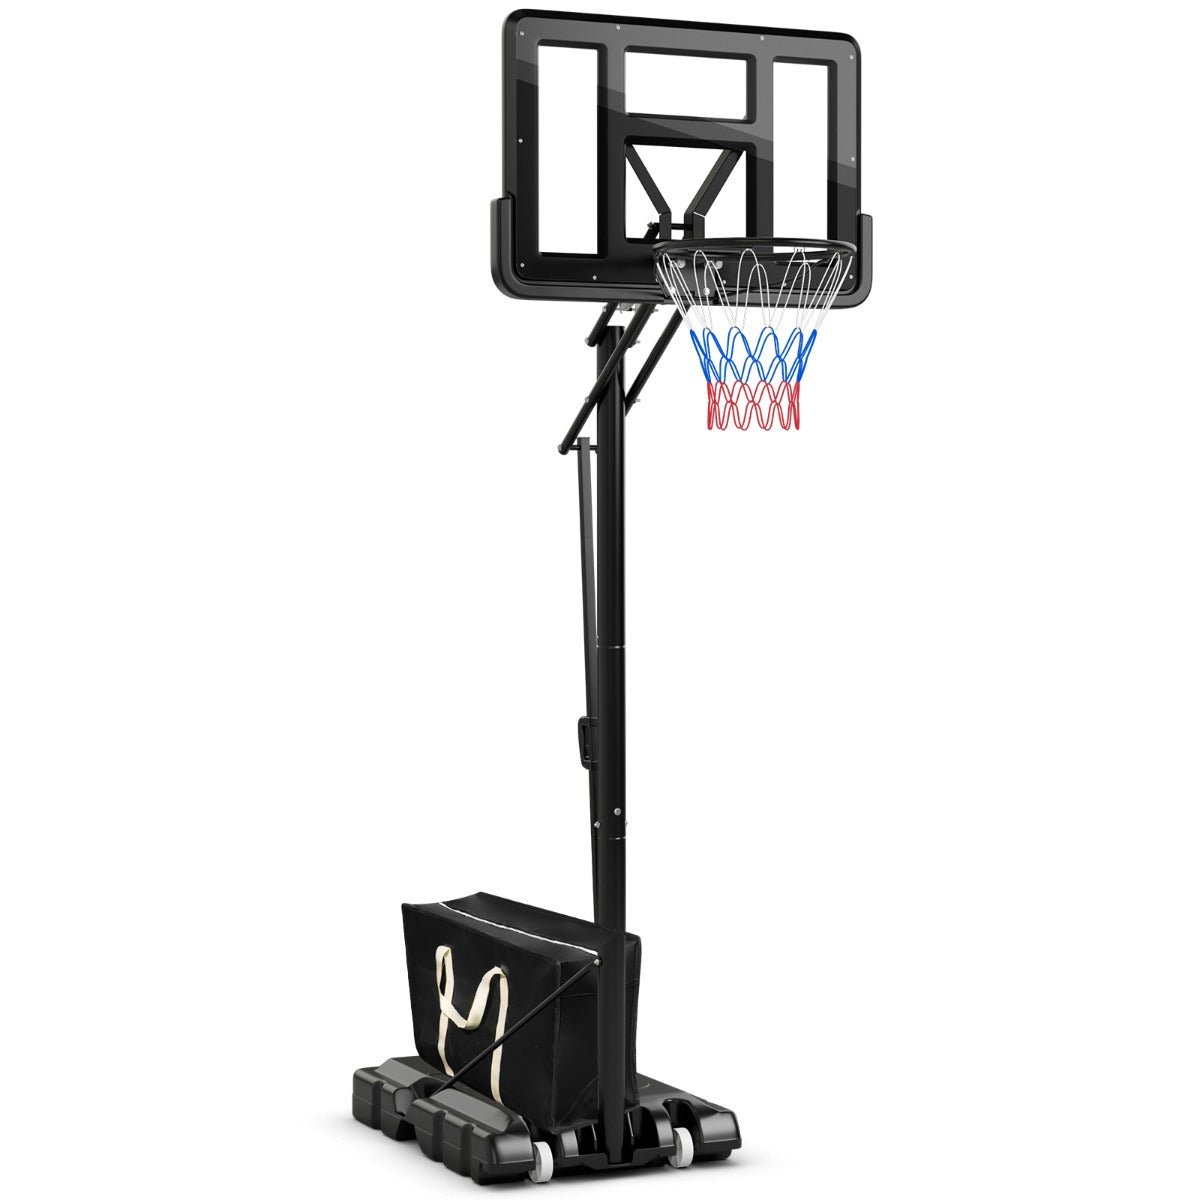 Durable basketball goal for indoor and outdoor play